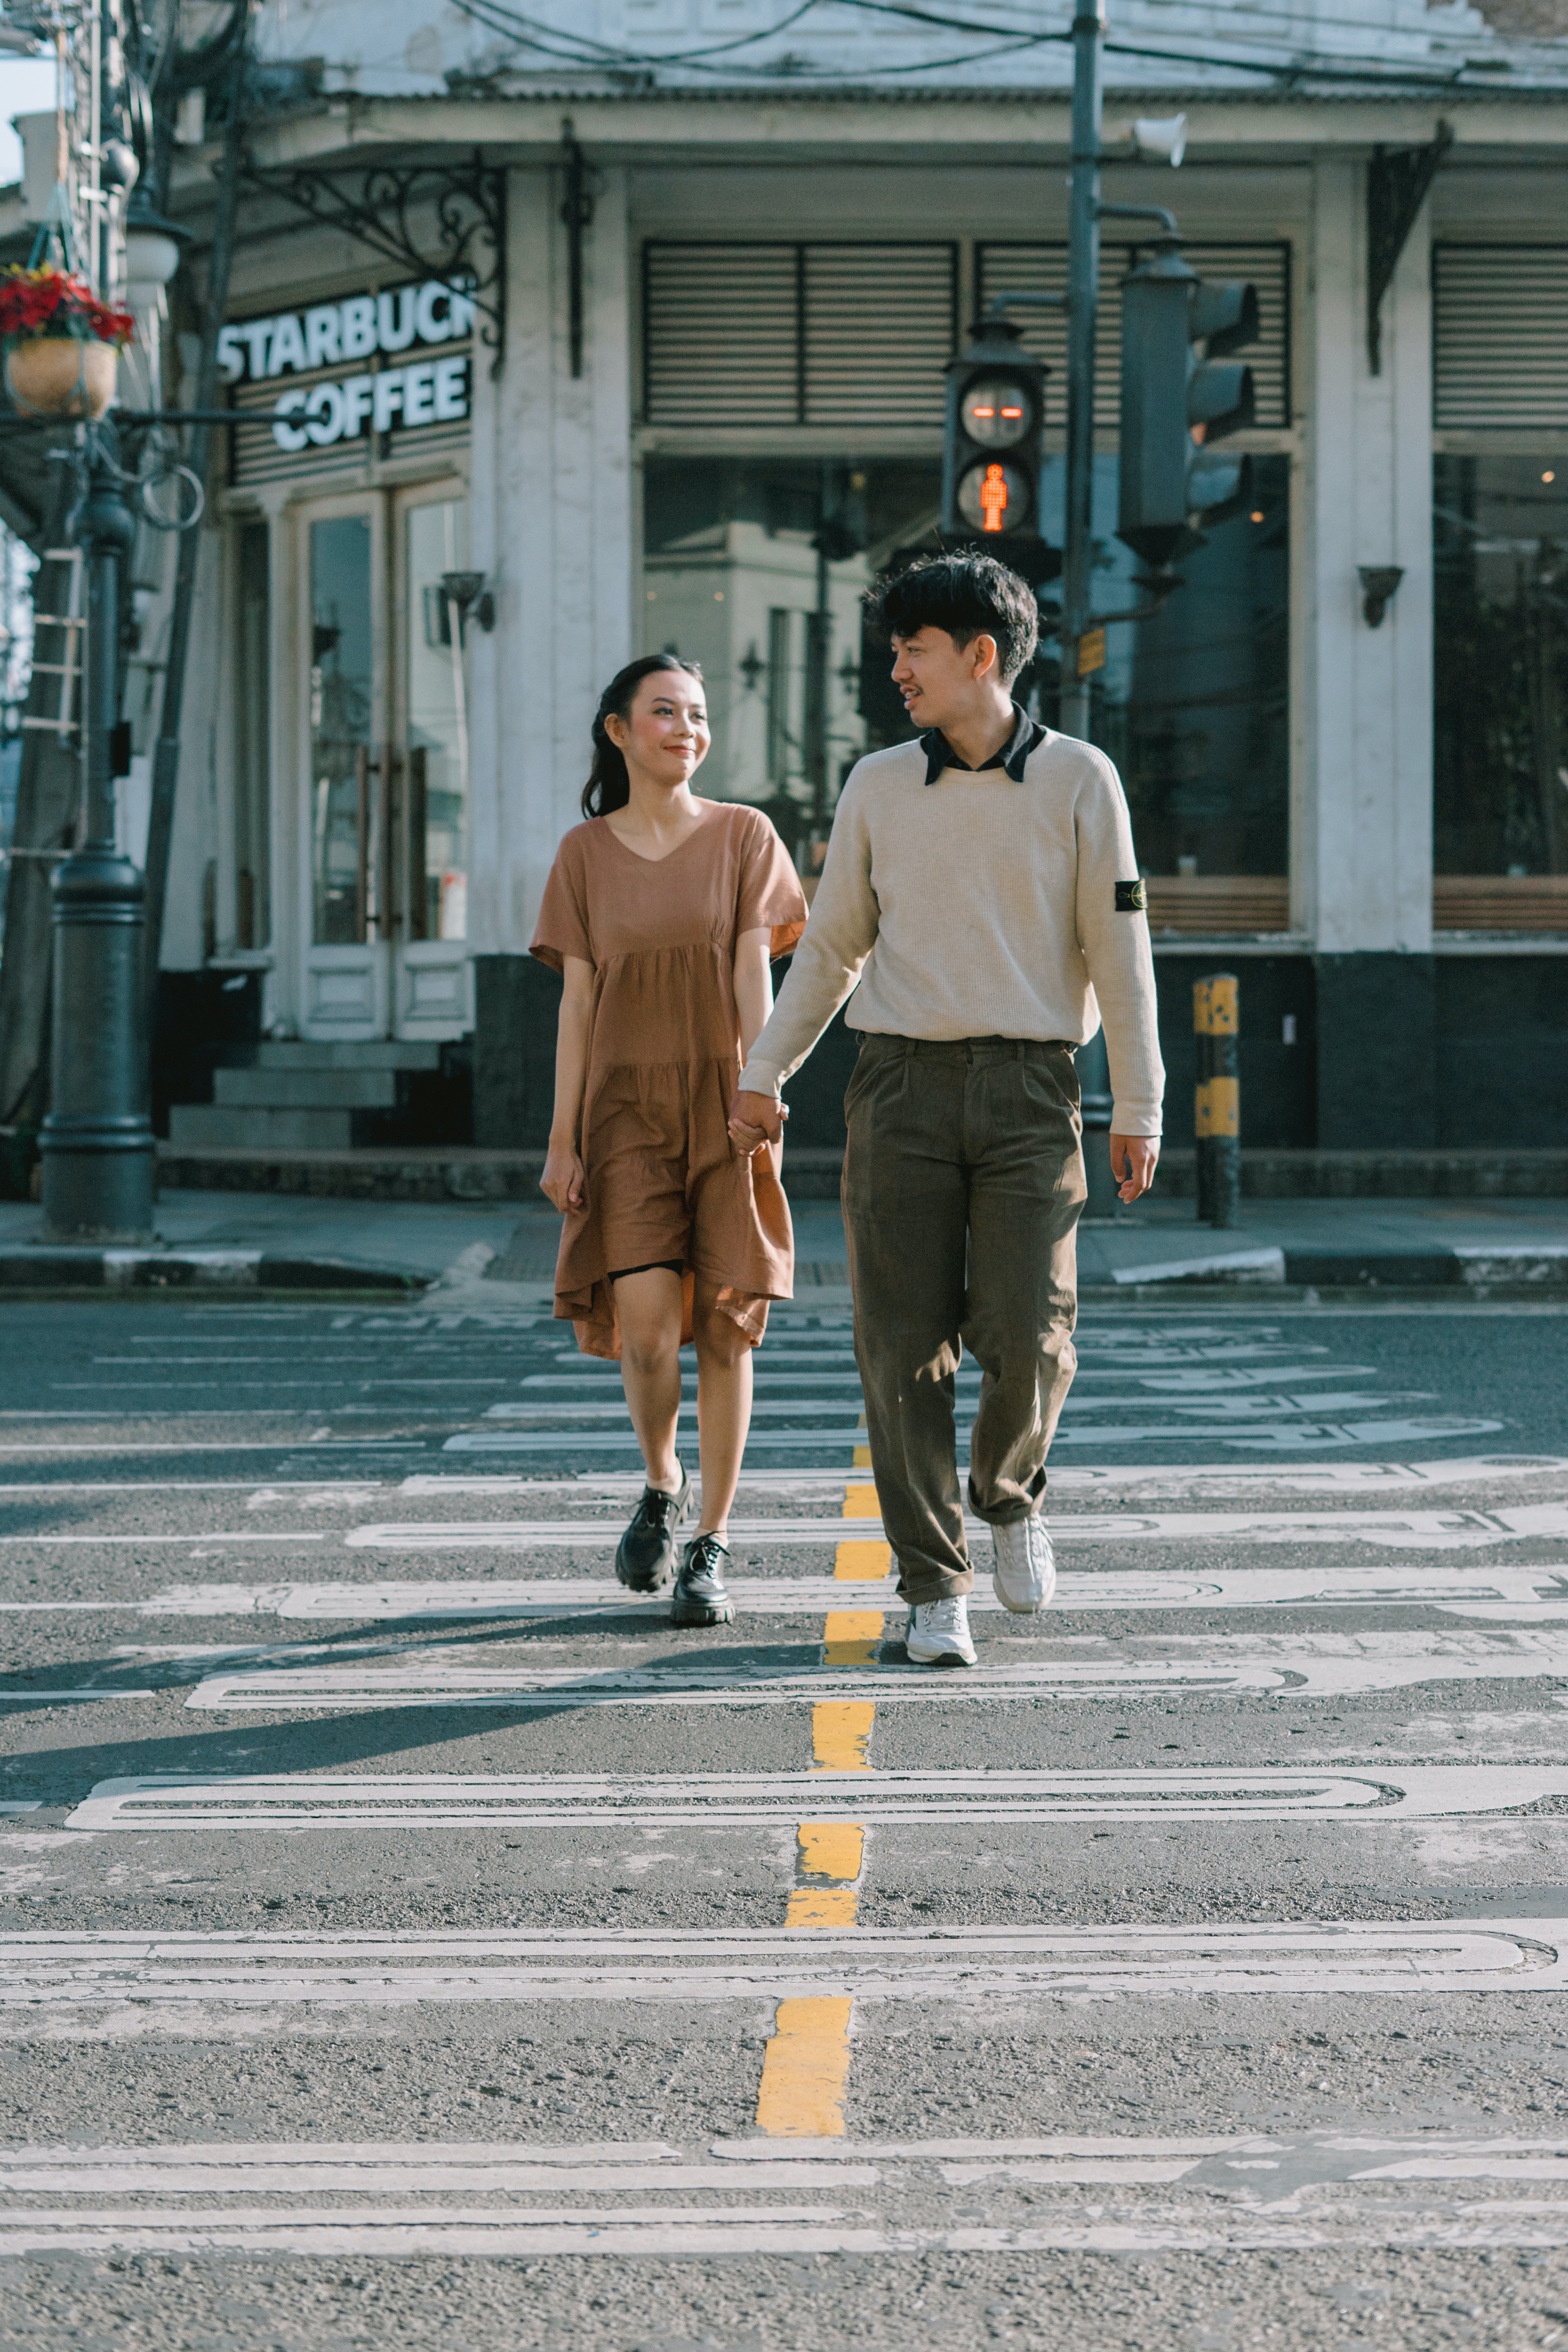 A couple walking and holding hands. | Source: Pexels